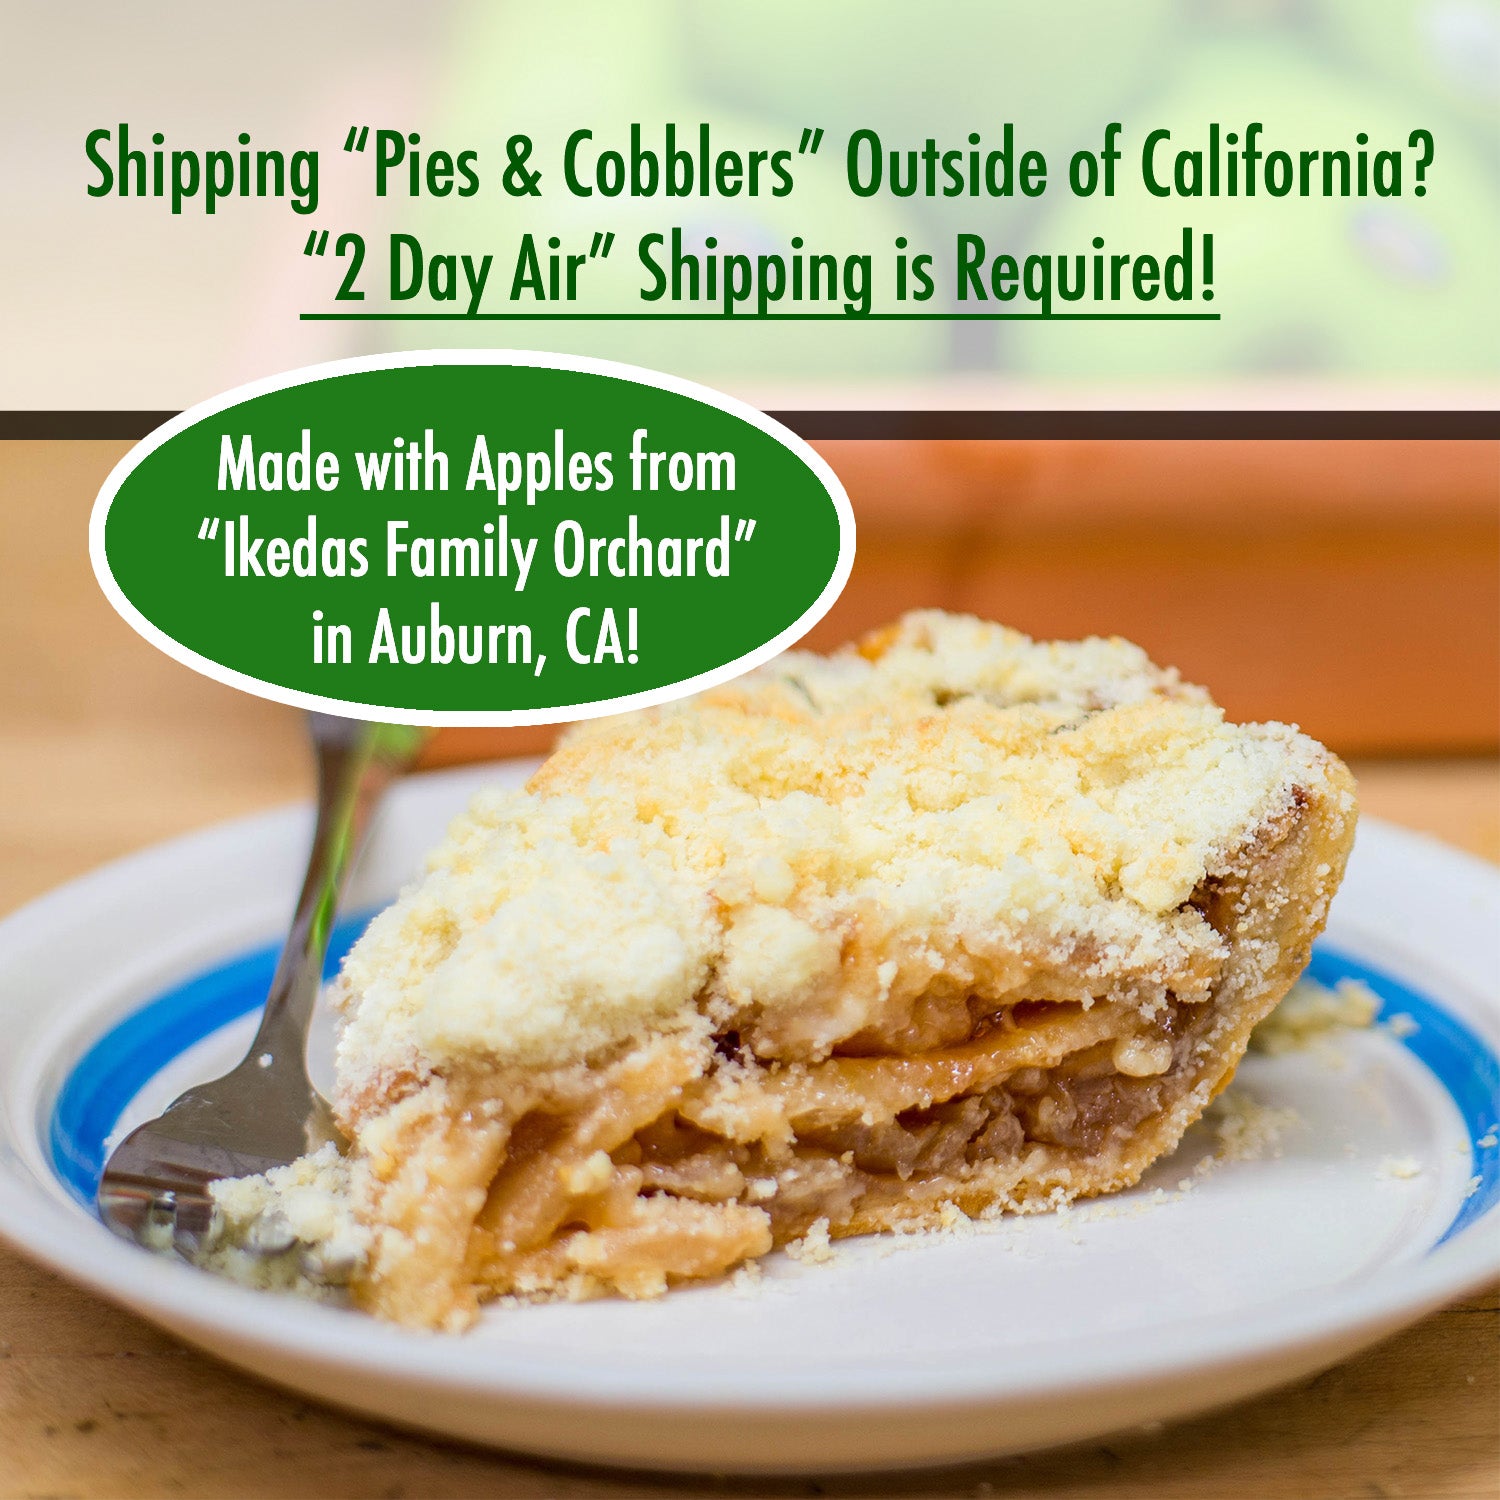 french apple cobbler, if shipping outside of california, 2 day air shipping required; made with ikedas orchard apples from auburn, california